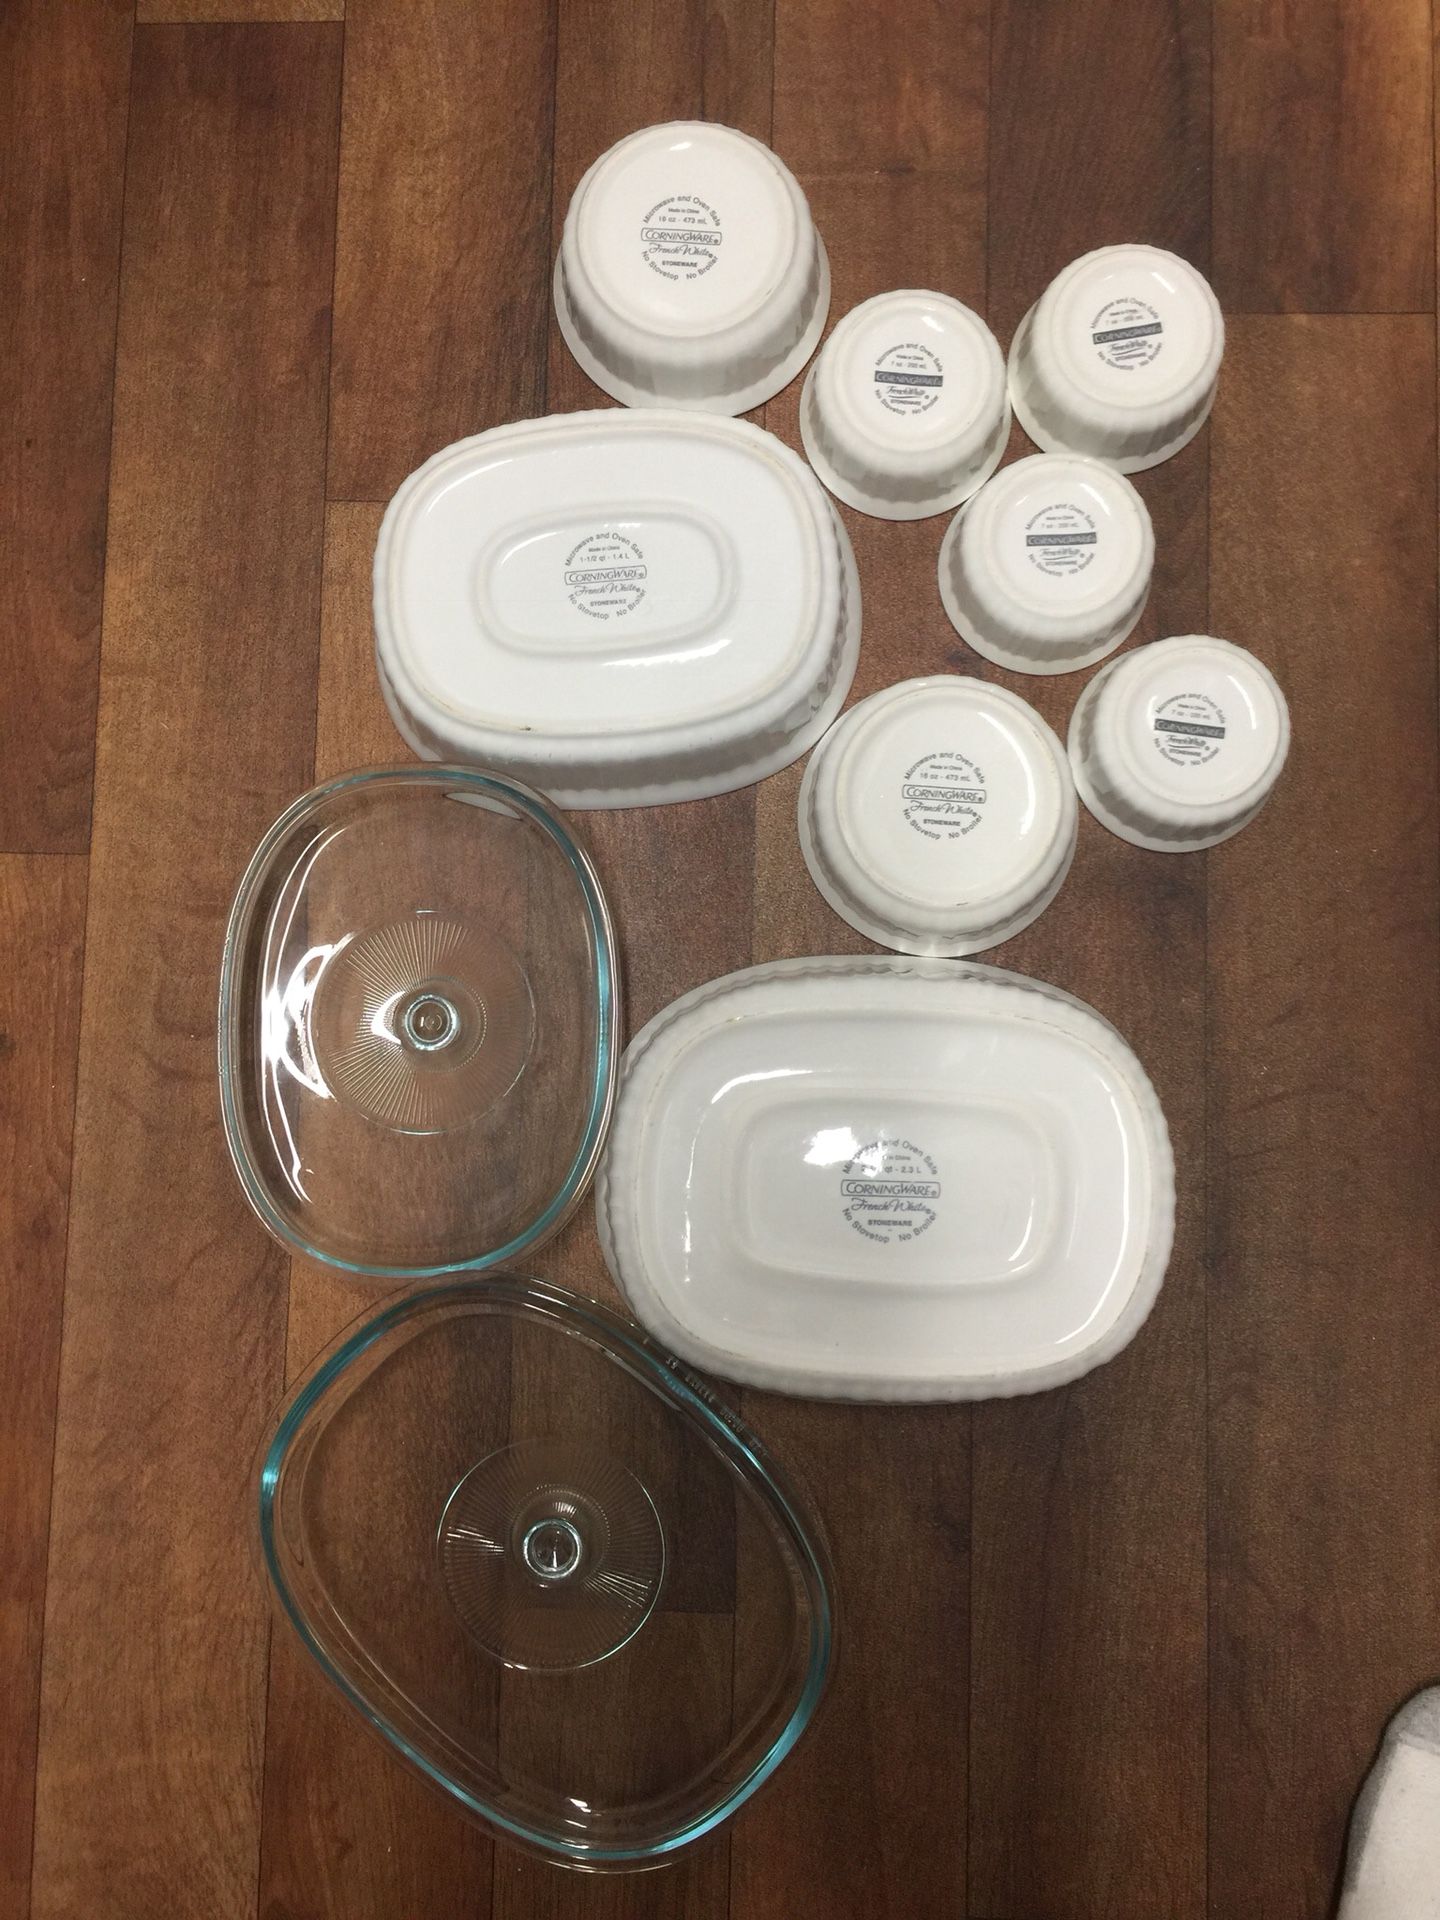 Set of CORNINGWARE microwave and oven safe